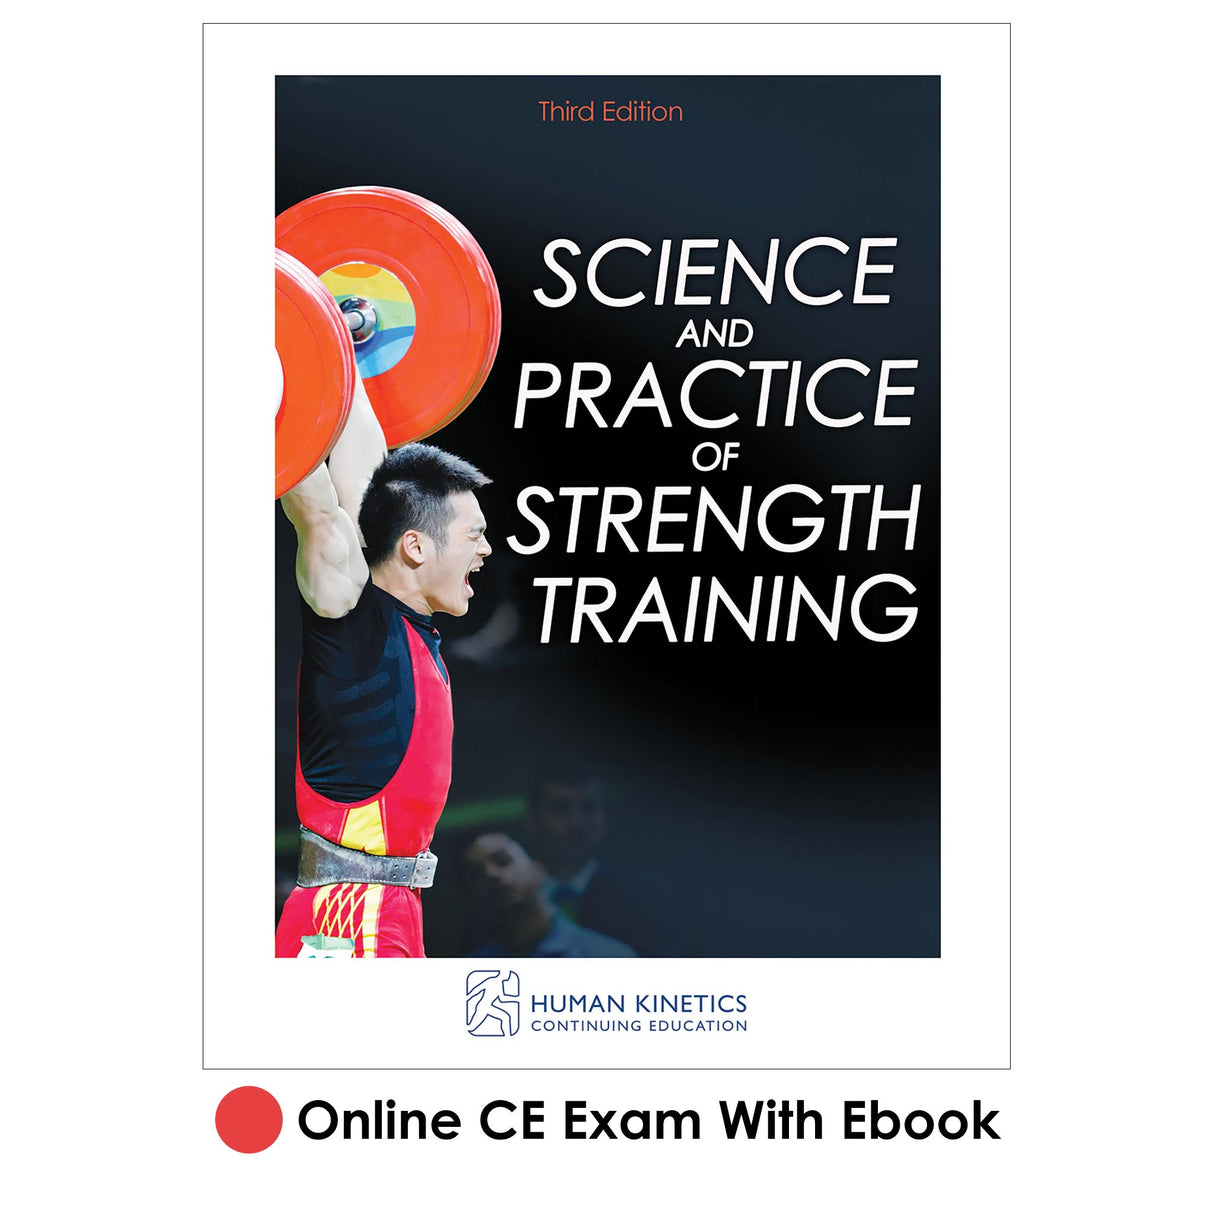 Science and Practice of Strength Training 3rd Edition Online CE Exam With Ebook